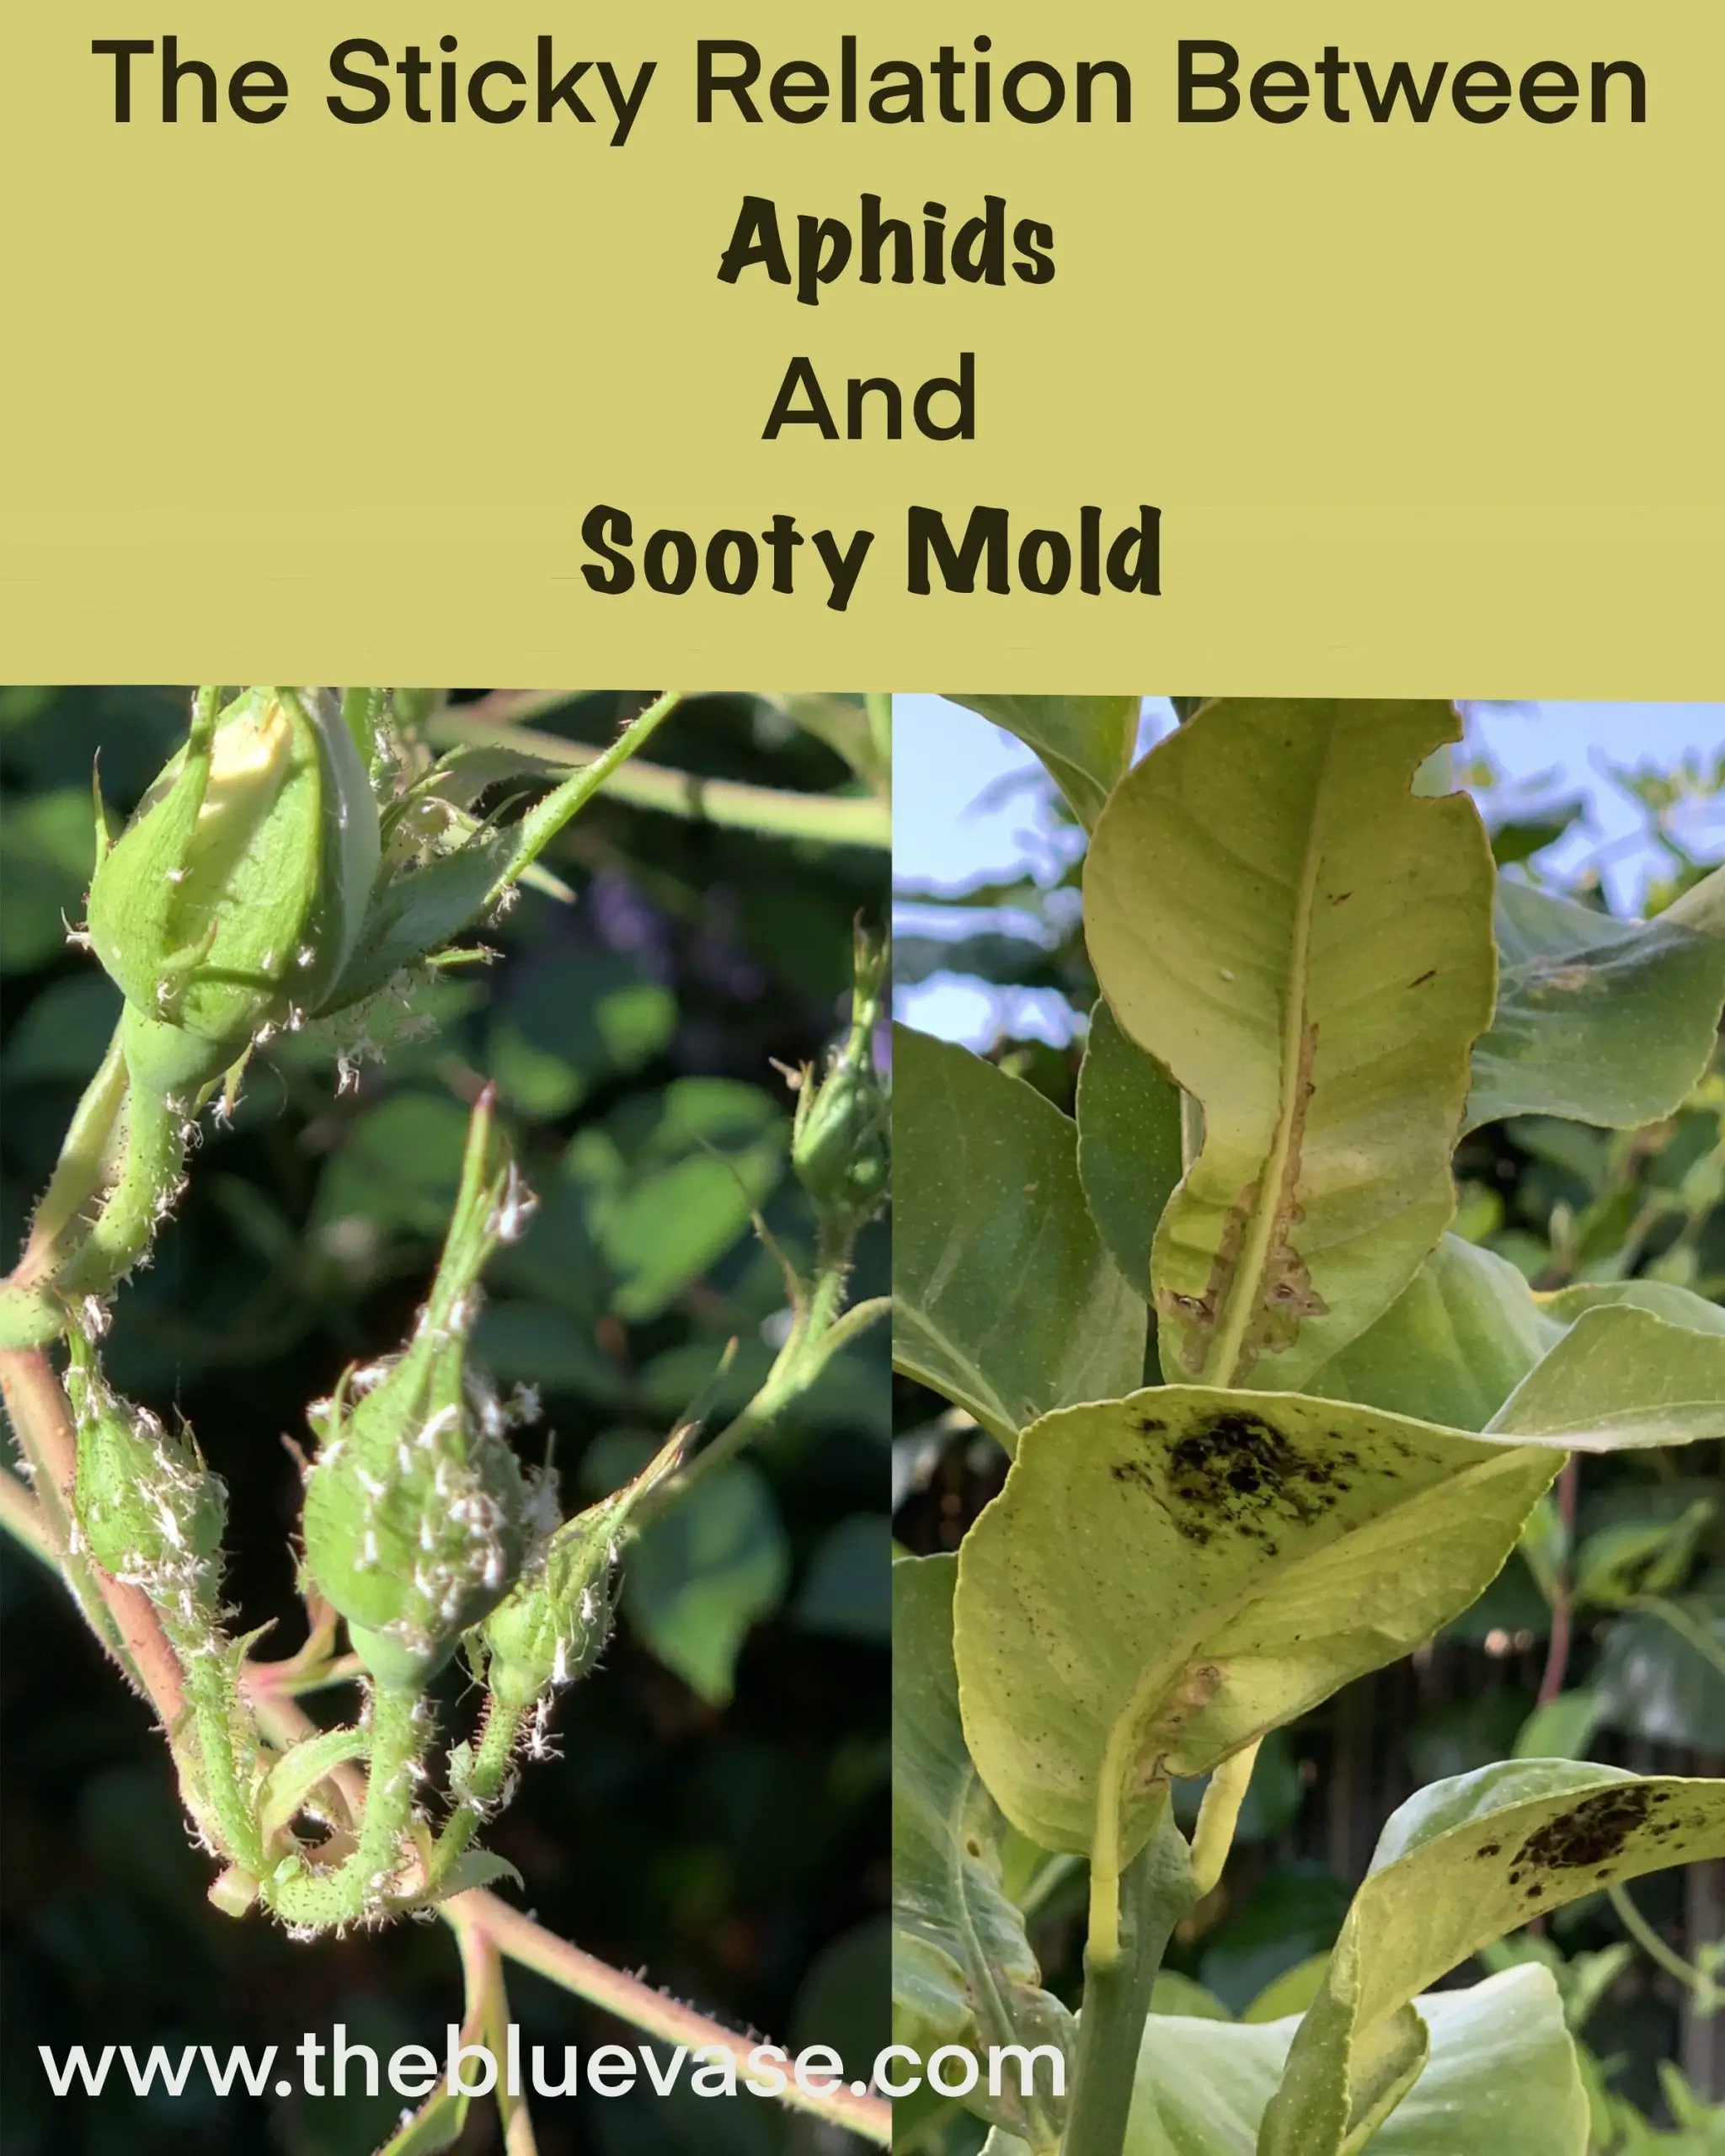 The Sticky Connection Between Aphids and Sooty Mold